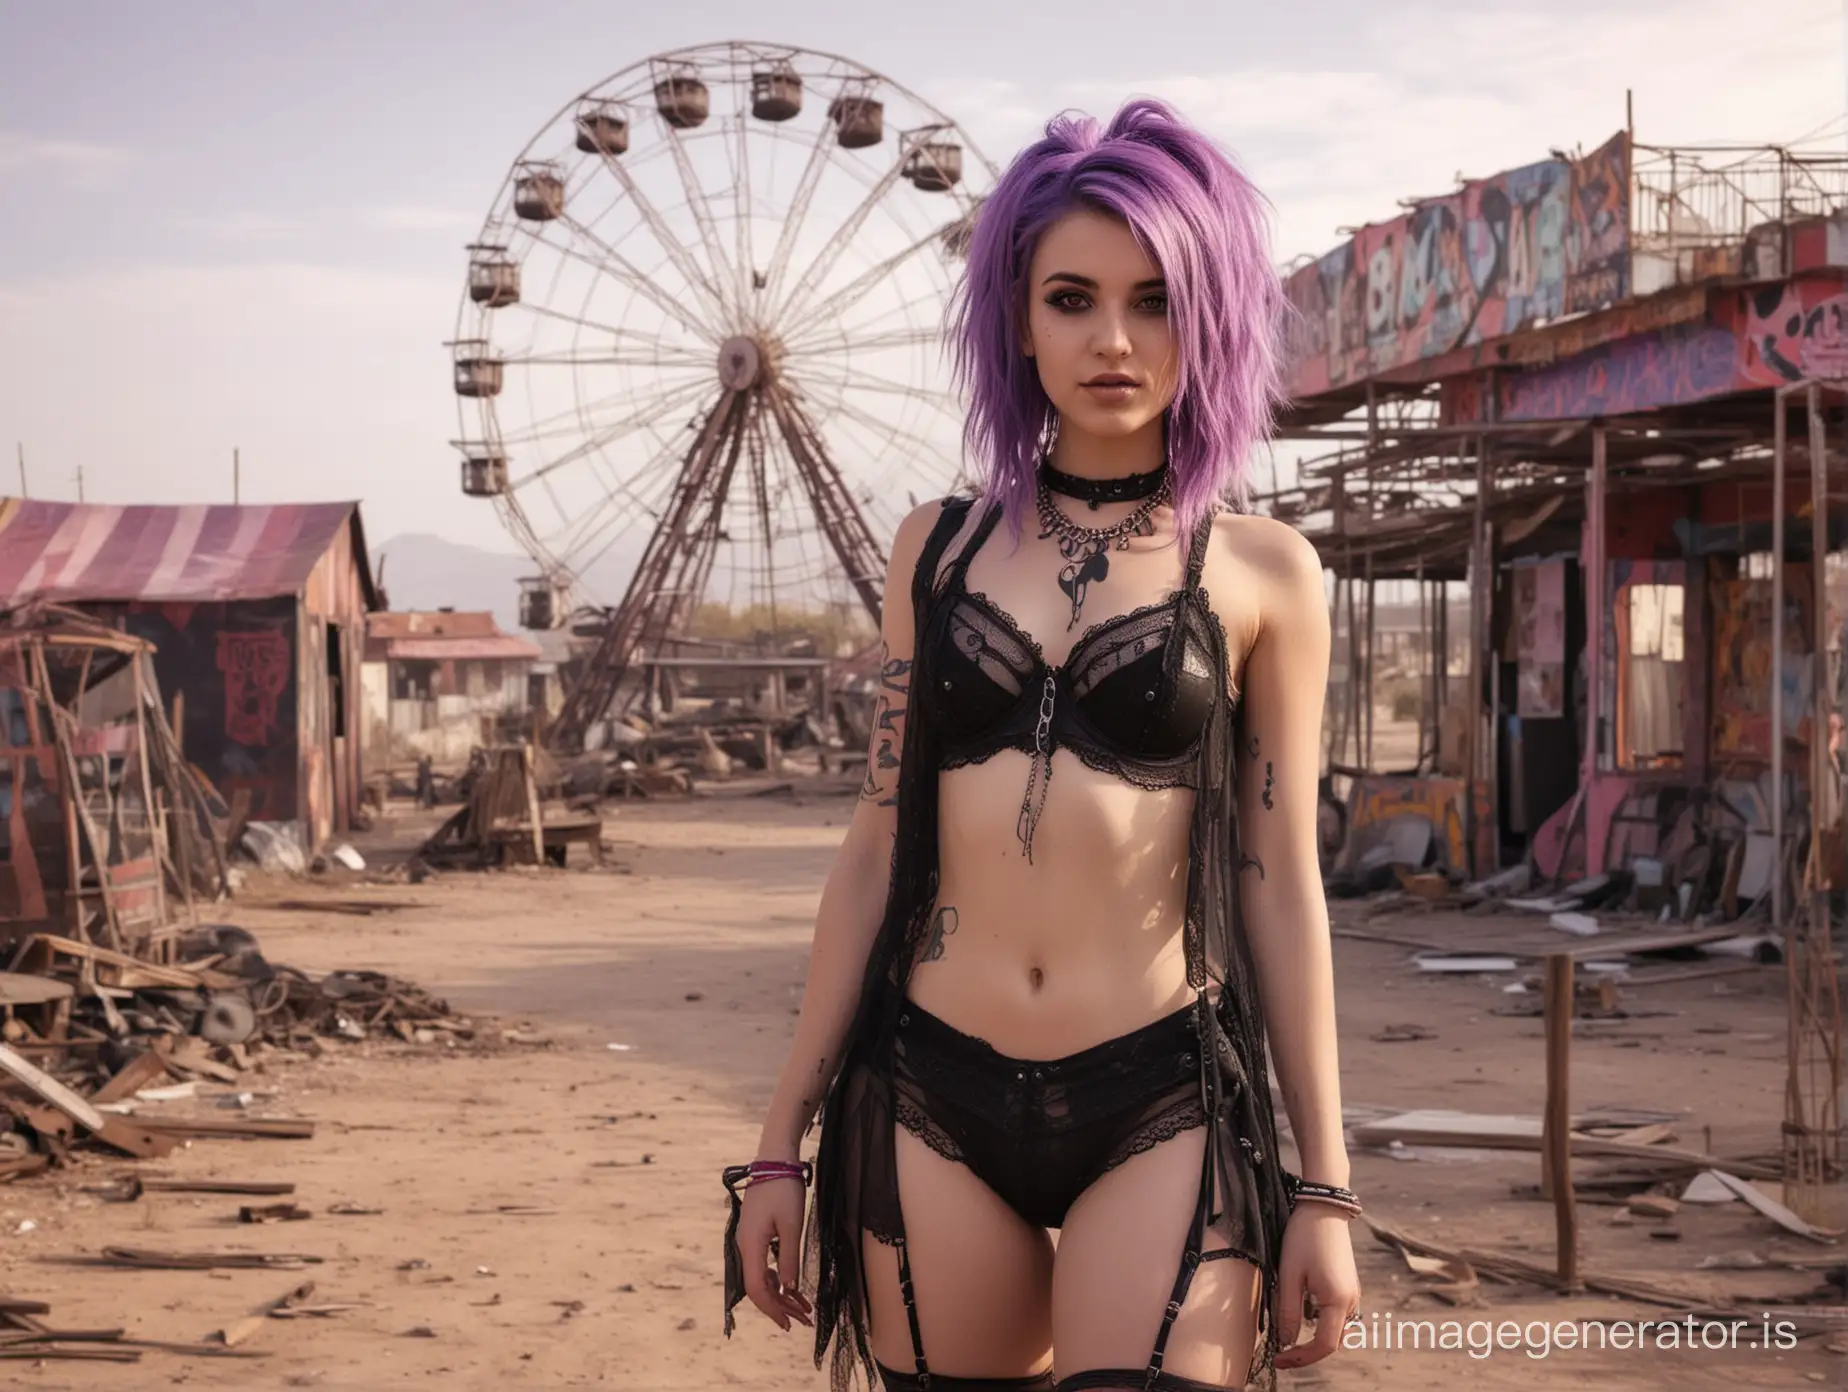 No pink or purple in the background. mysterious young goth girl wearing very revealing slutty sheer pink clothing, black and purple hair. Cheeky smile. In an abandoned carnival in the middle of the deser, like in the series "Carnivale". Big broken down machines, in rusty metal colours, lie behind her, Abandoned. No pink or purple in the background, only brown and metal. There is no sign of people or civilization. Natural lighting. Dramatic. Full body in picture